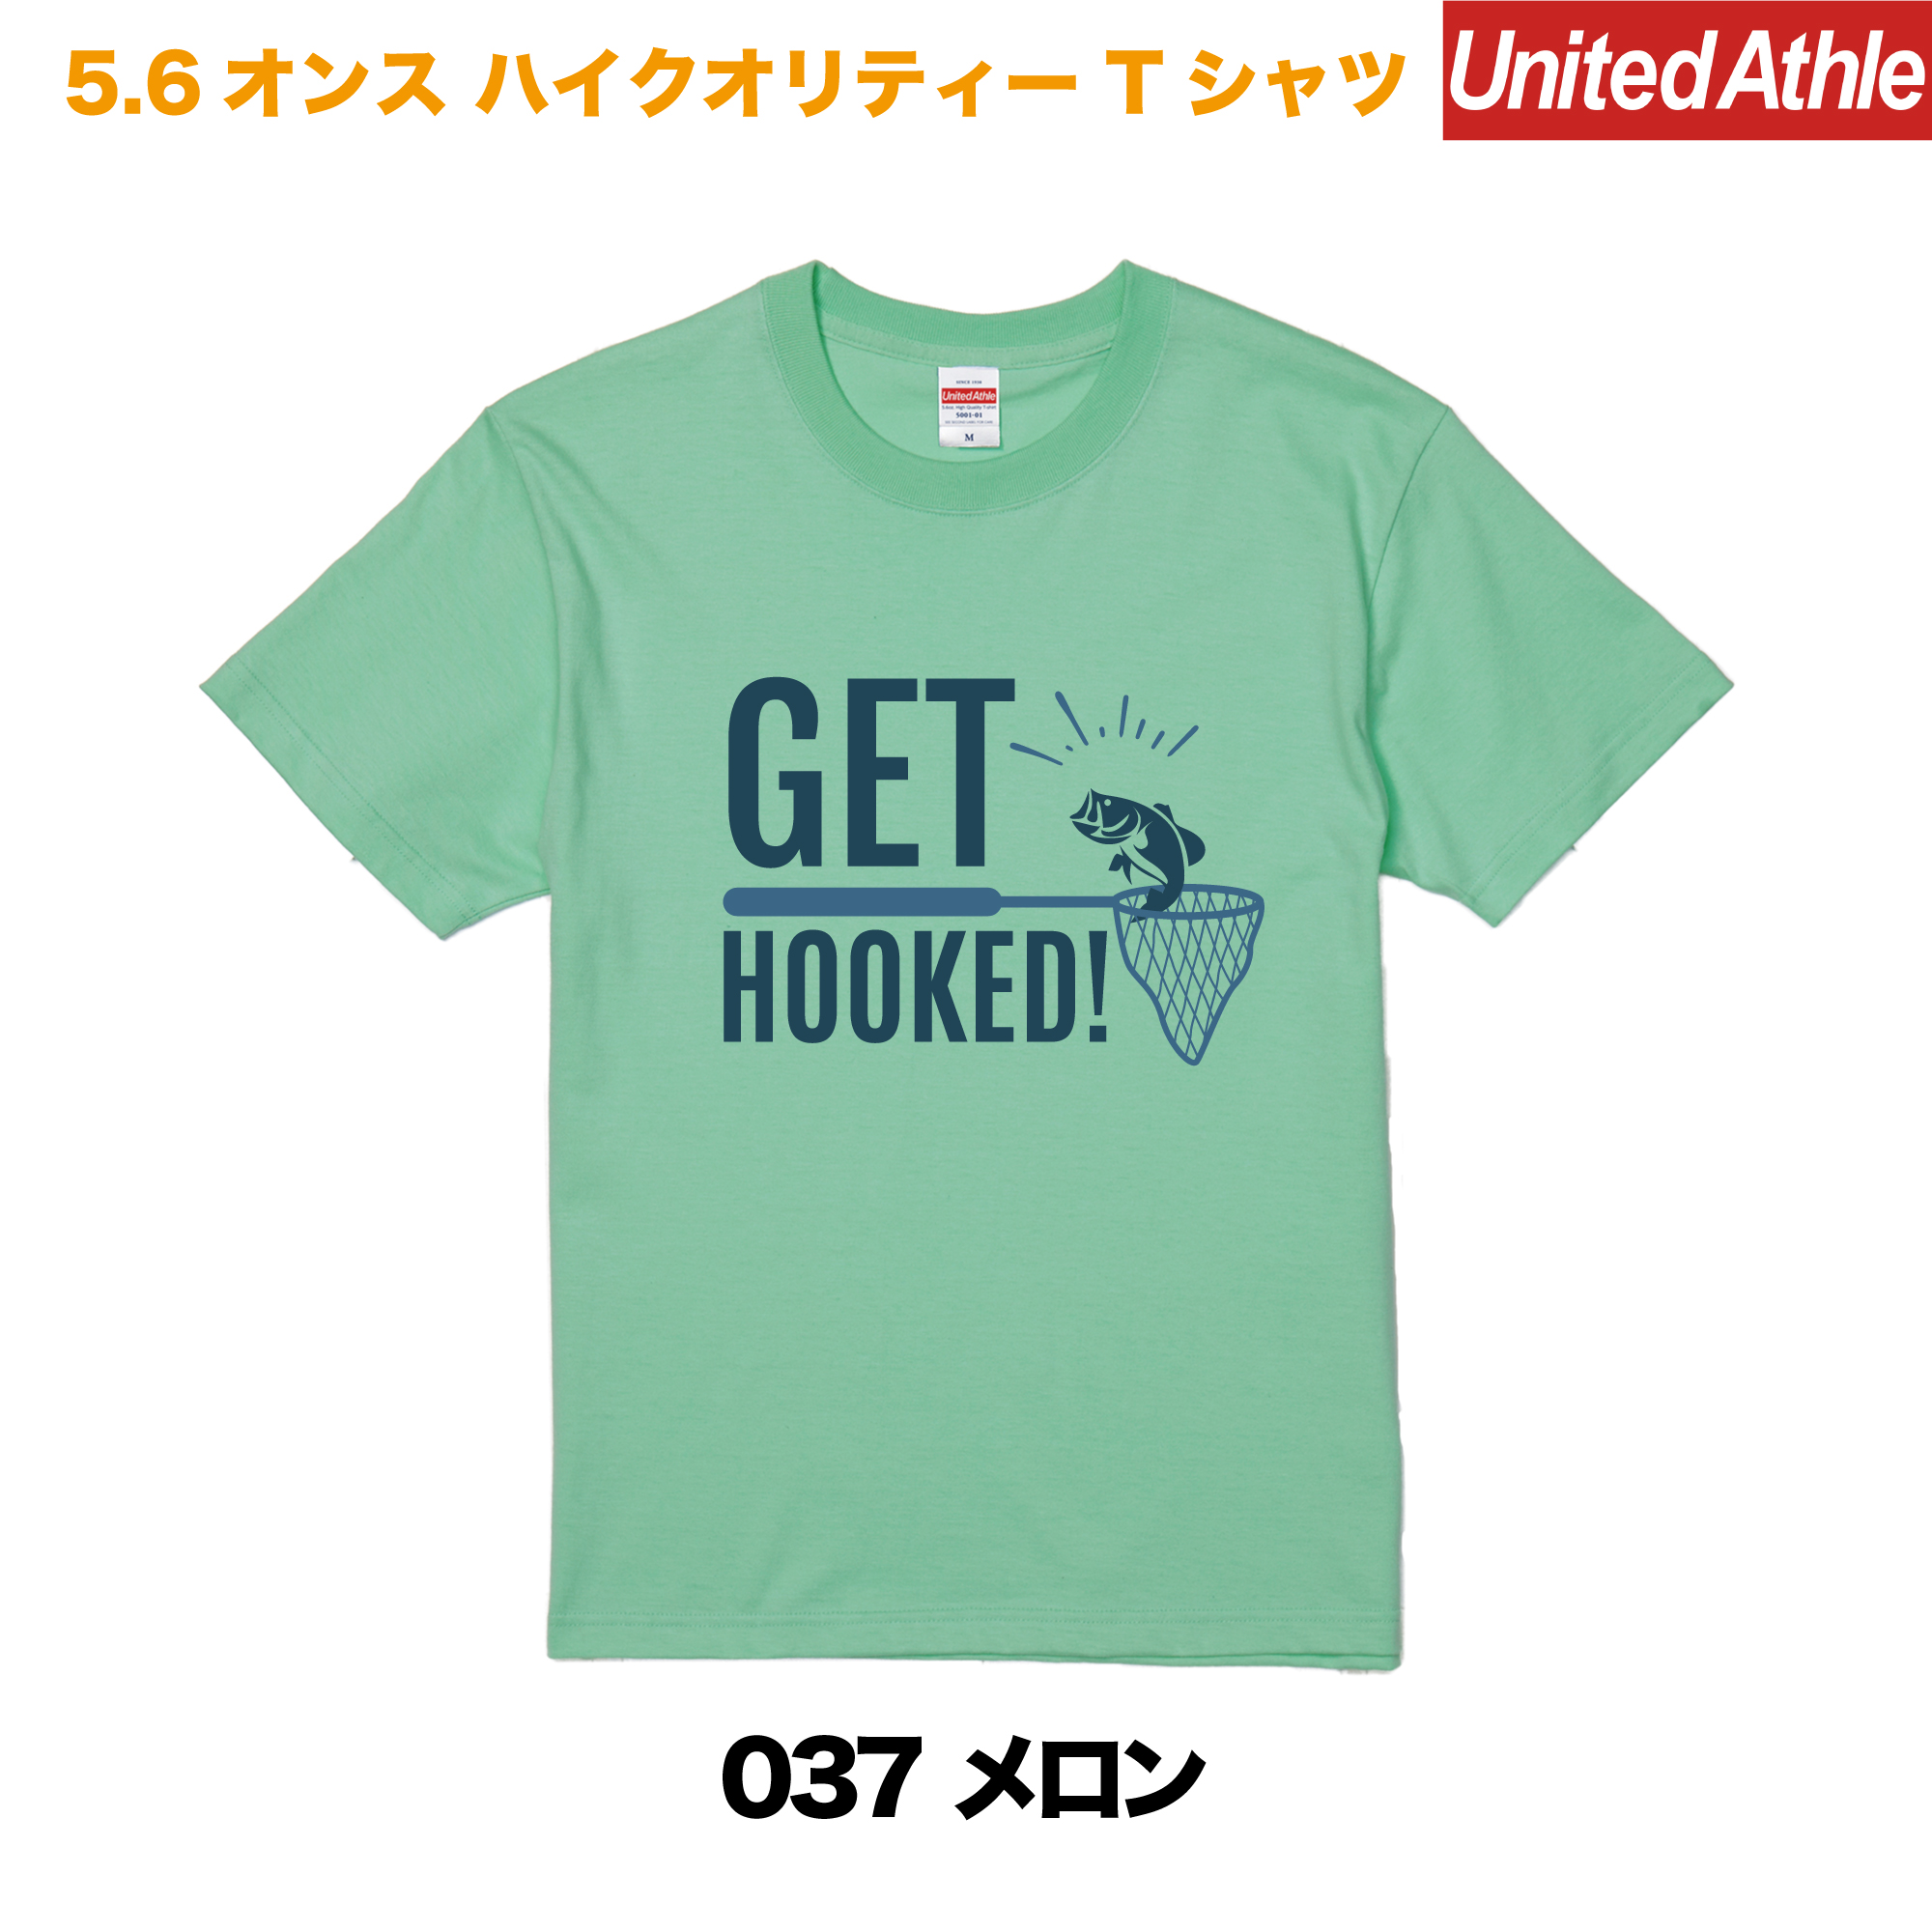 GET HOOKED　プリントTシャツ　5001-01【メロン】＜アダルト＞